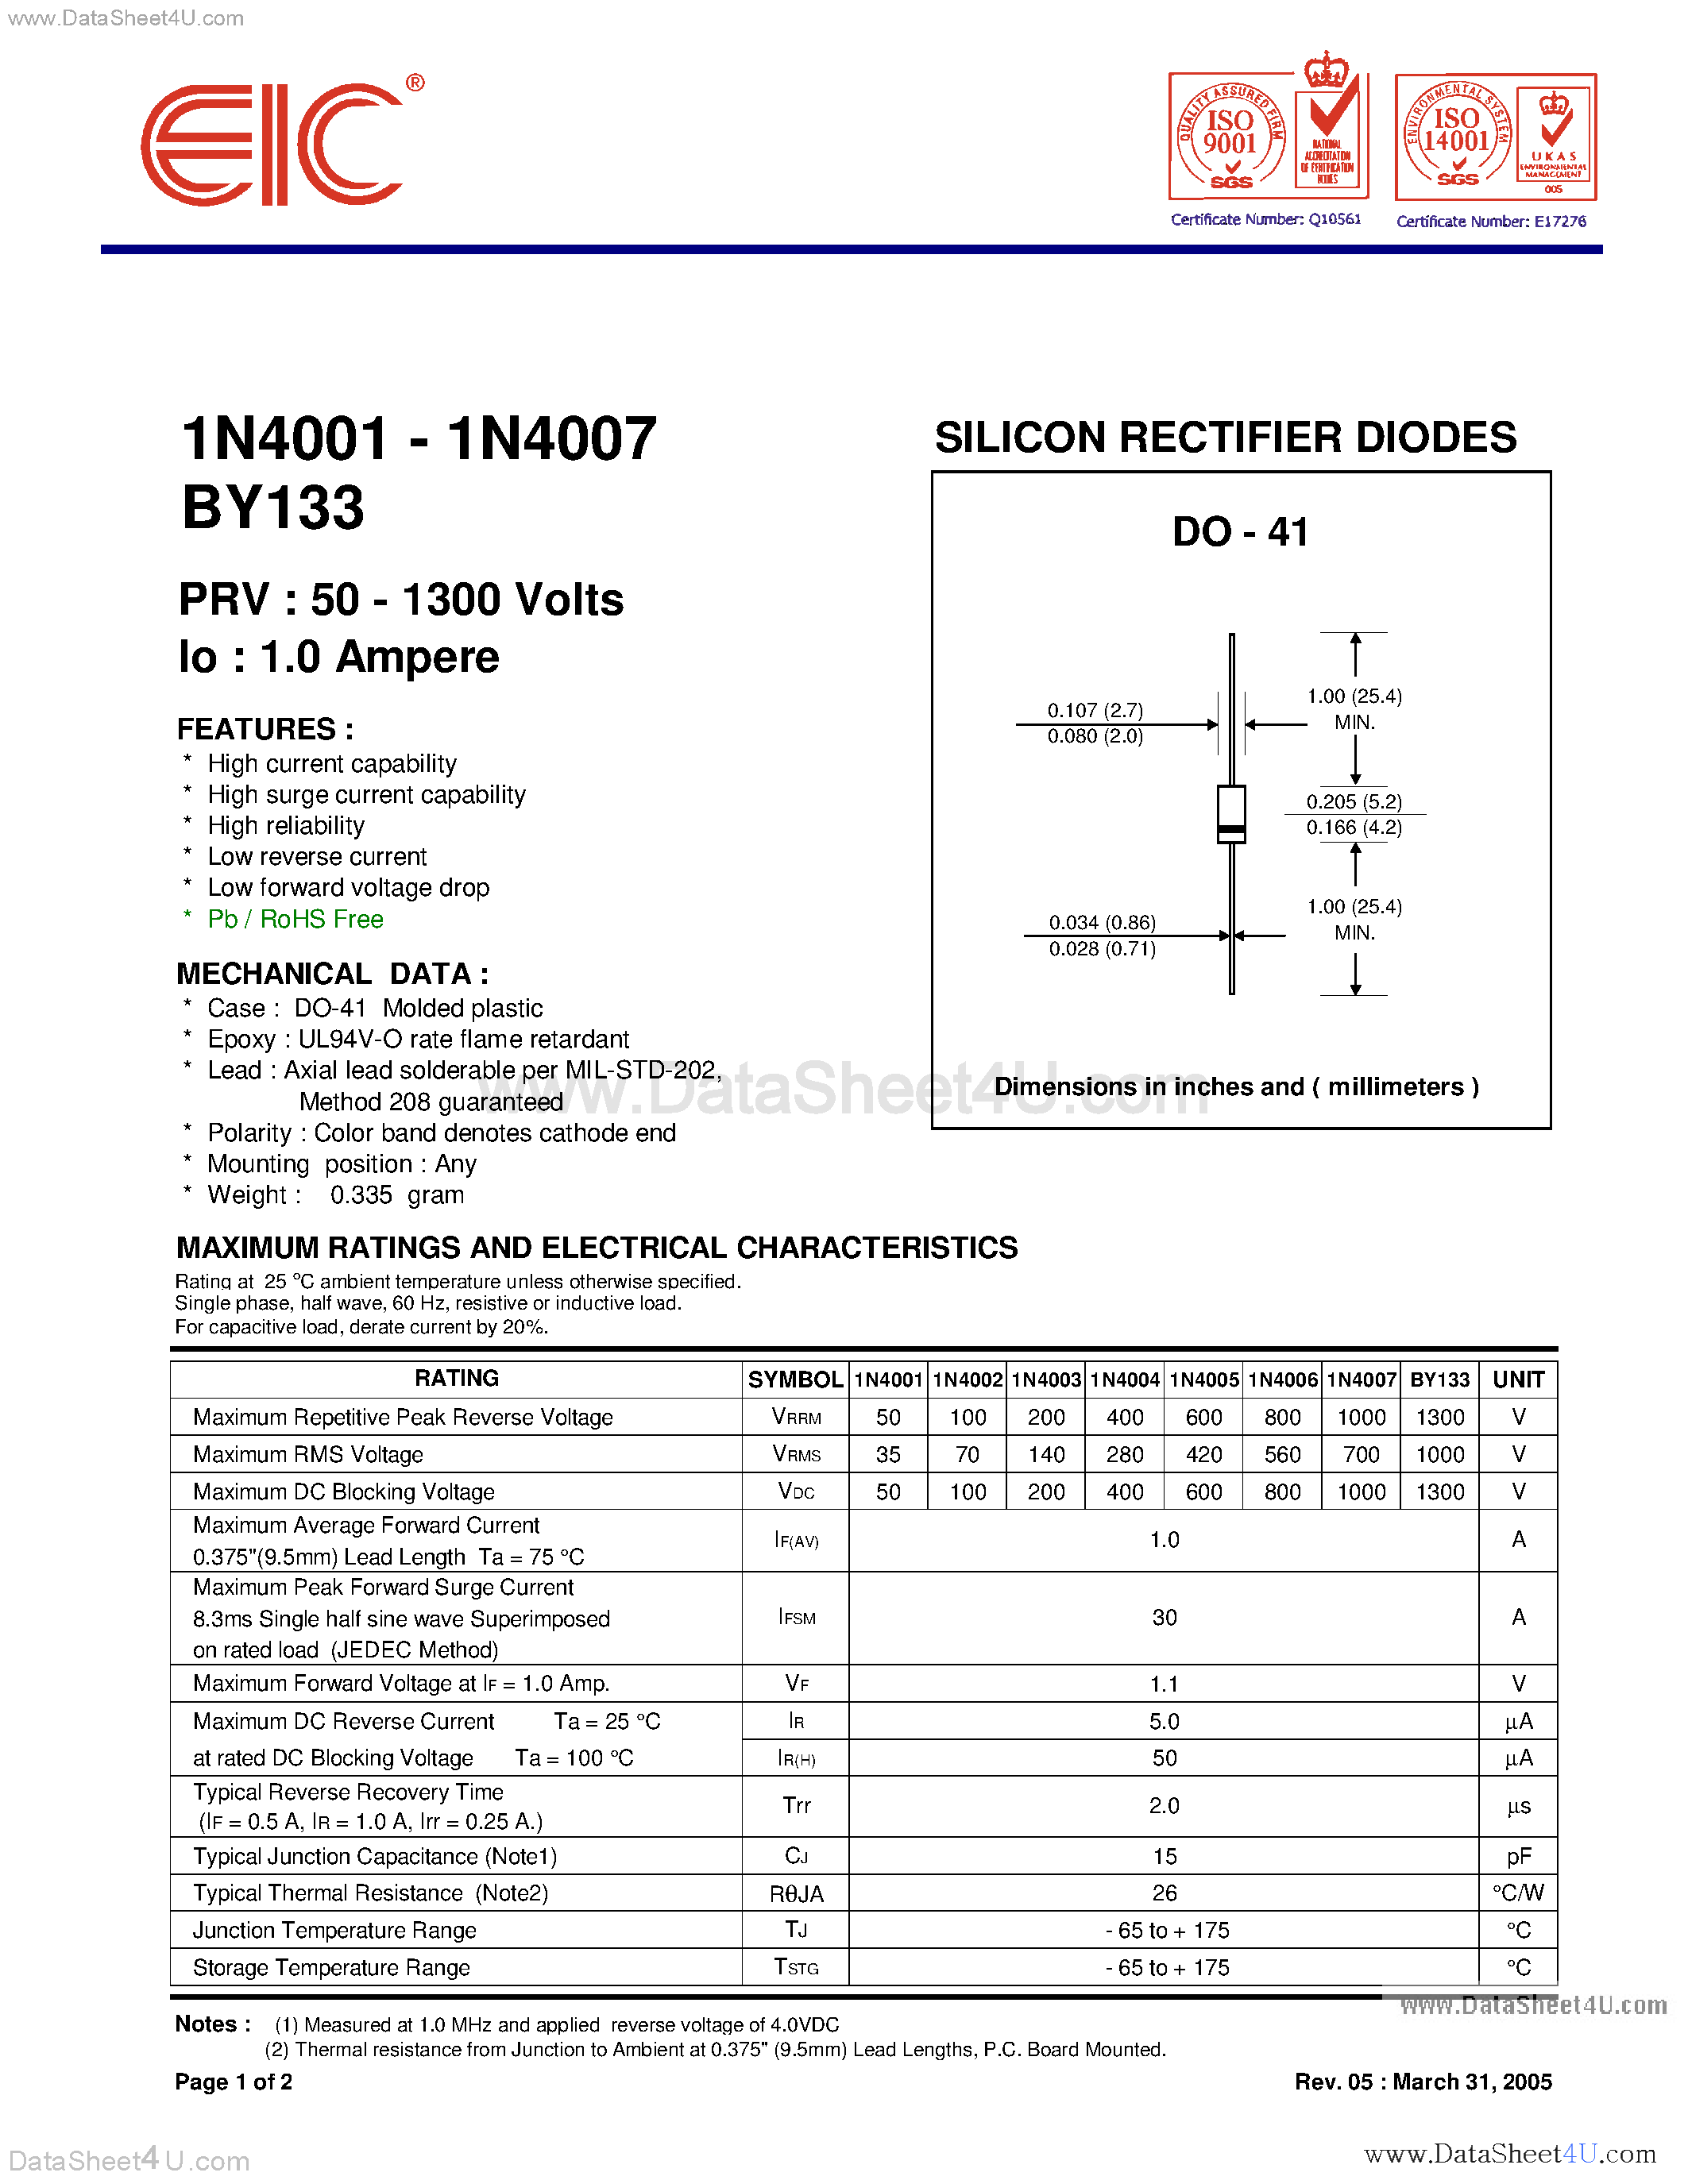 Даташит 1N4001 - (1N4001 - 1N4007) Silicon Rectifier Diodes страница 1